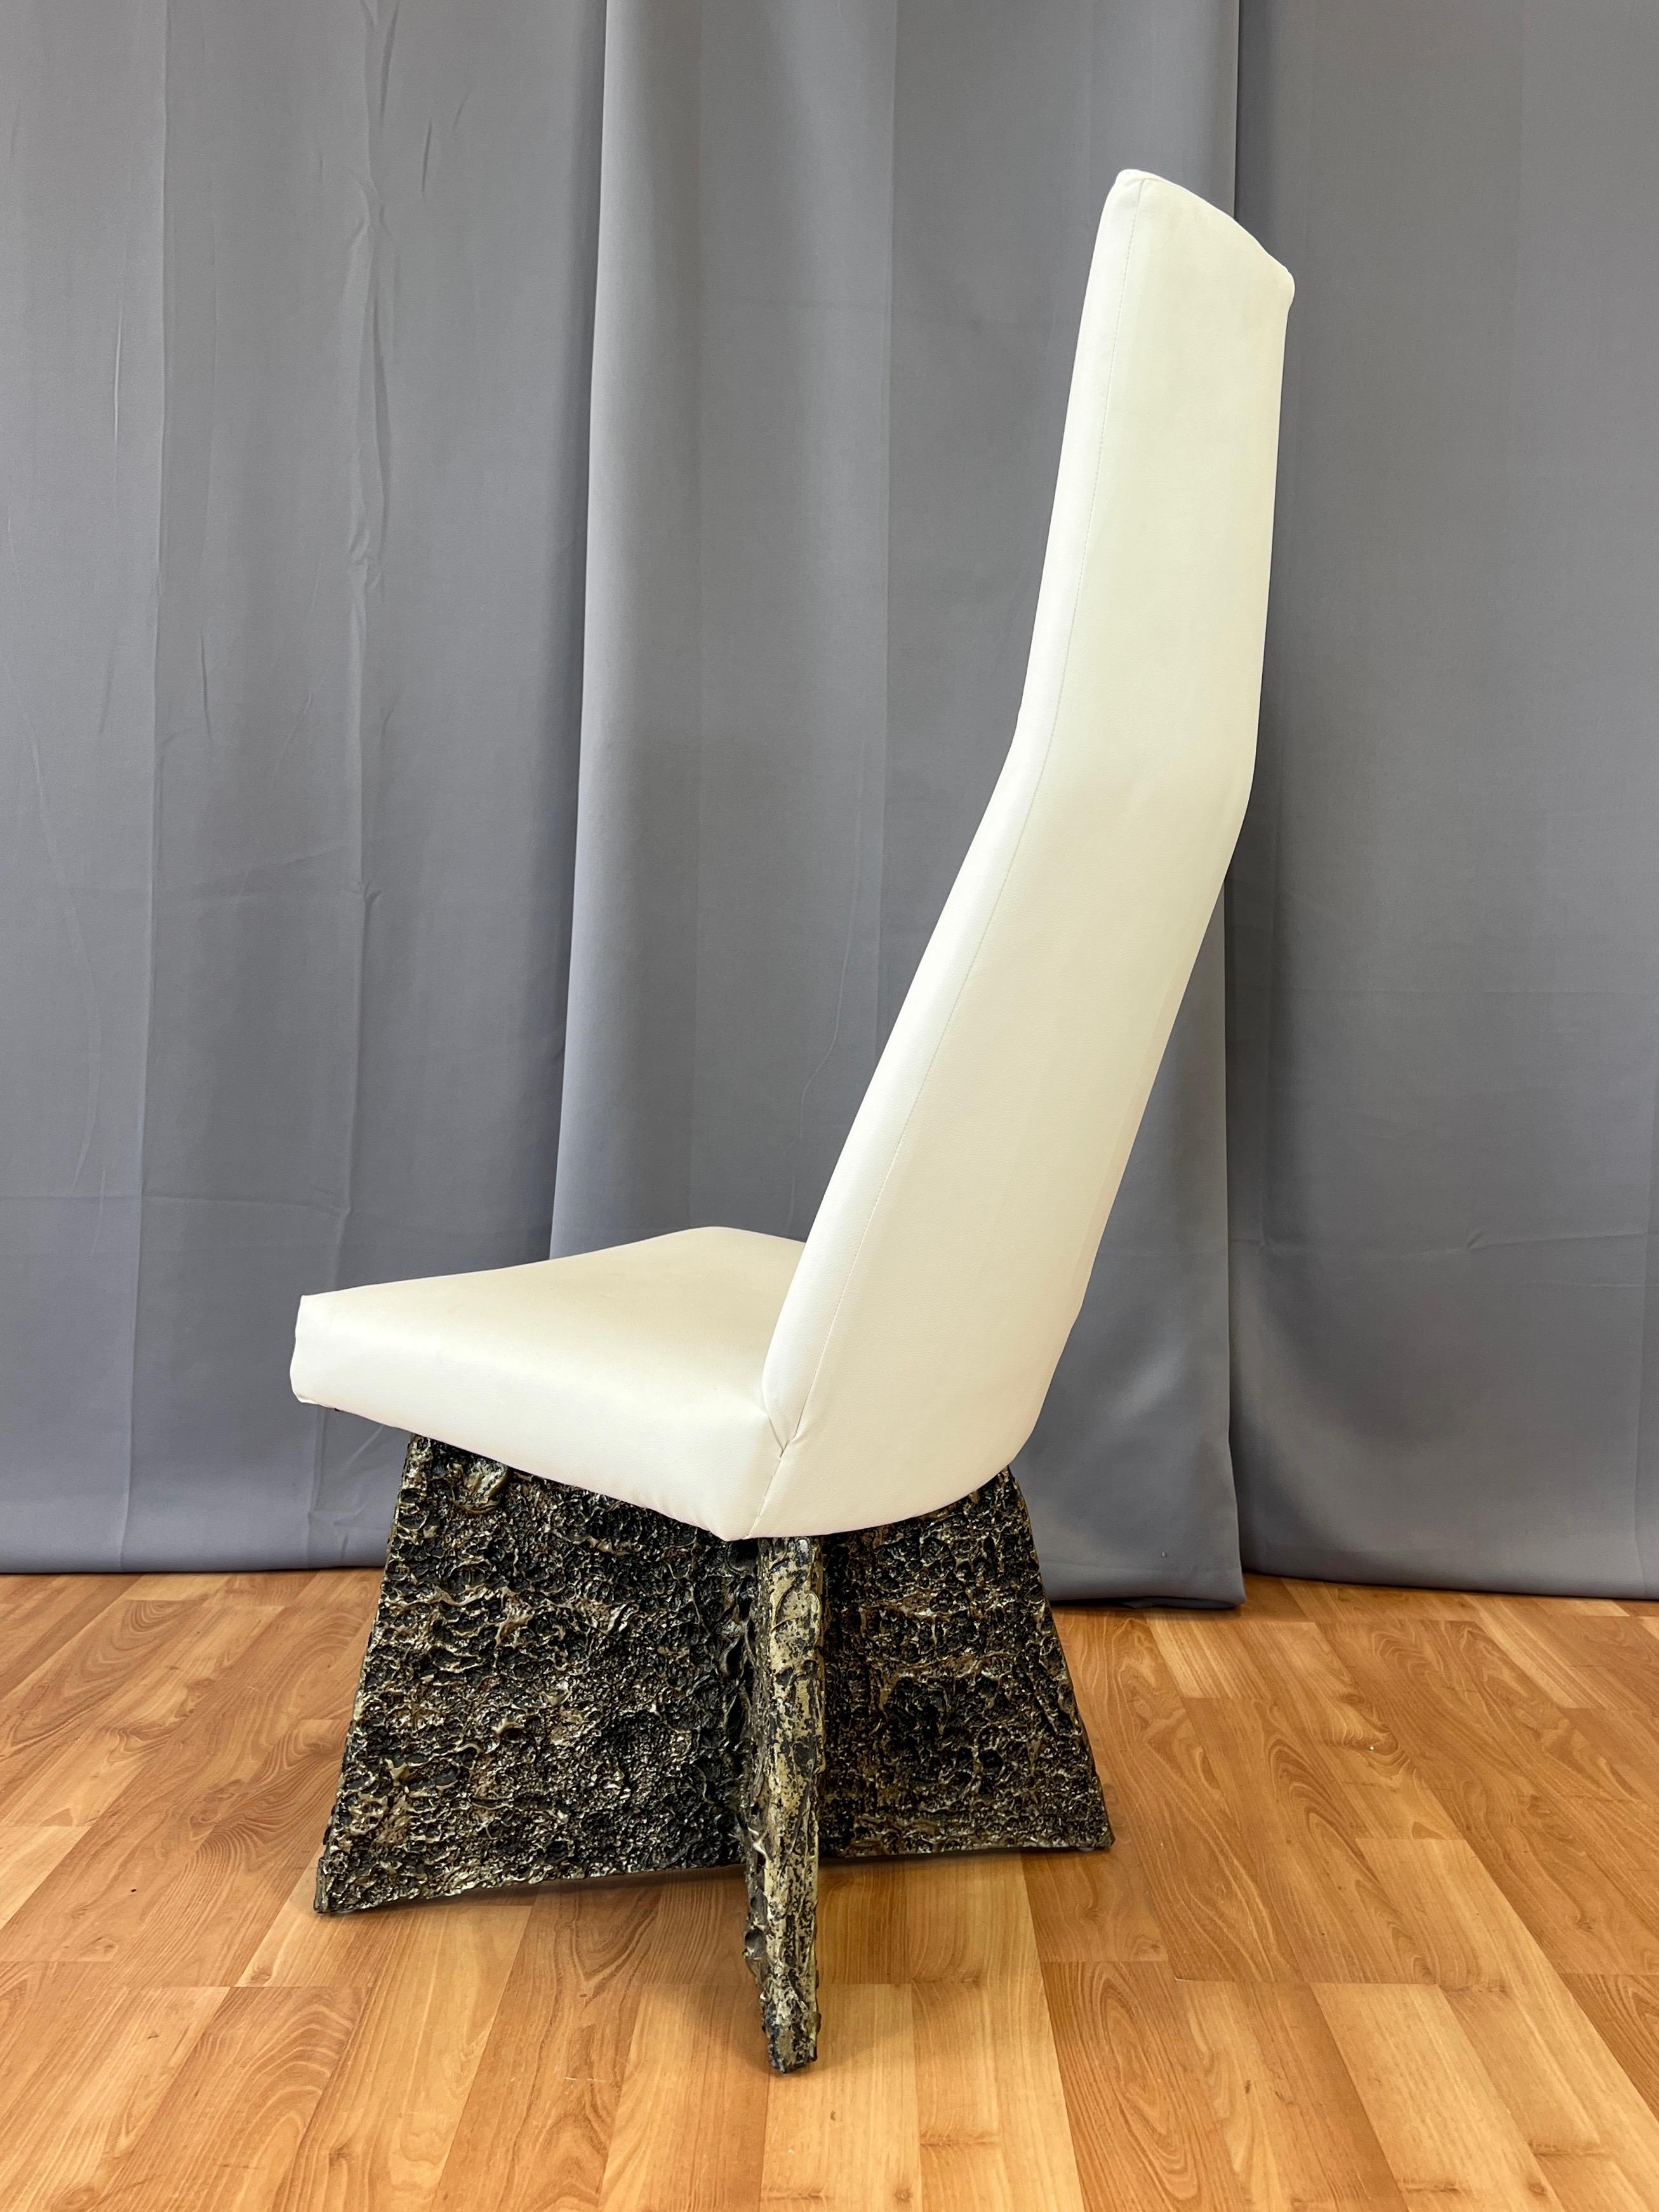 Adrian Pearsall for Craft Associates Brutalist High Back Side Chair, Late 1960s For Sale 1